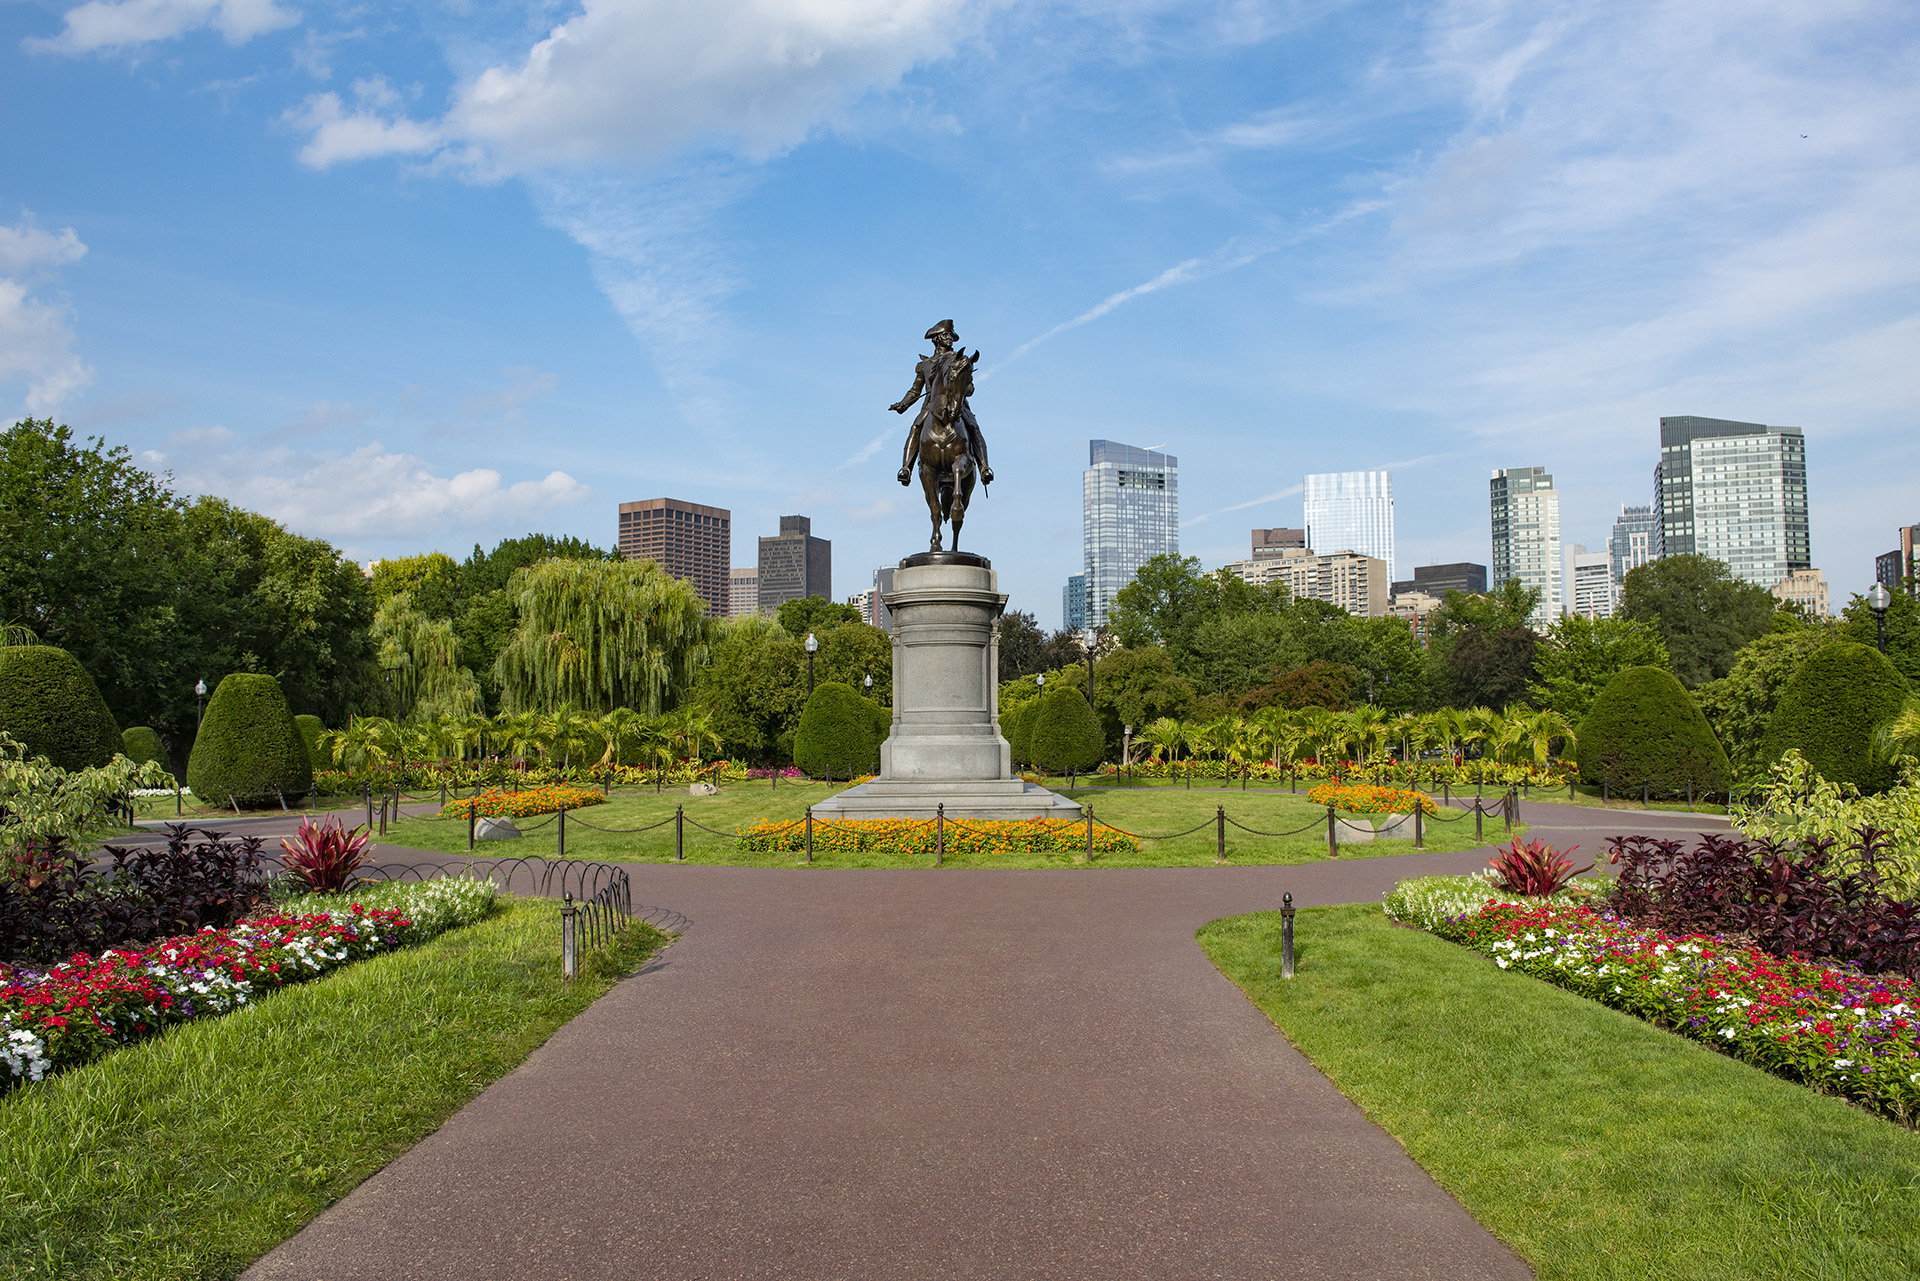 Beacon Hill District, Boston MA, USA , An equestrian statue of George Washington by Thomas Ball is installed in Boston's Public Garden, in the U.S. state of Massachusetts.